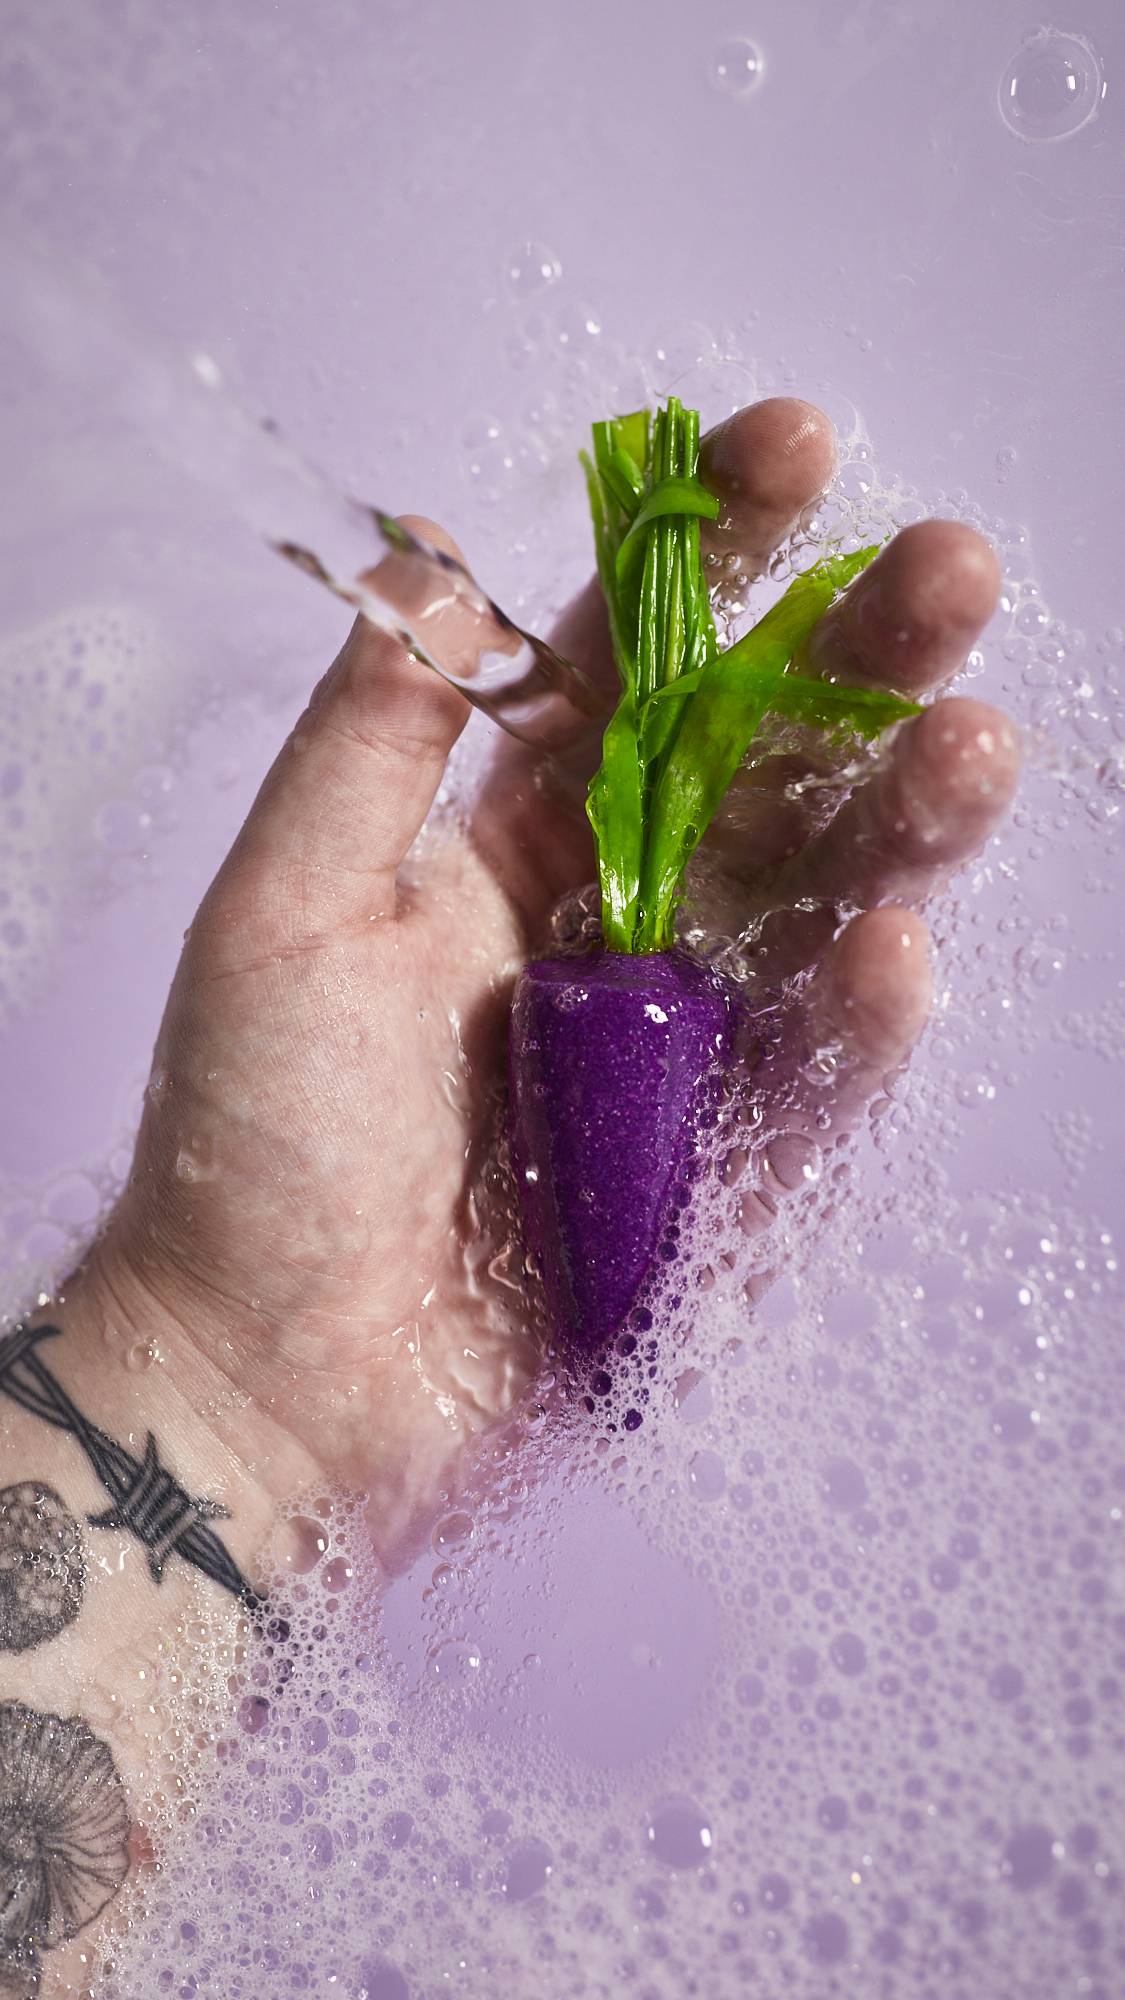 A close-up image of the model's hand holding the purple carrot bubble bar under running water creating delicate, bubbly water below. 